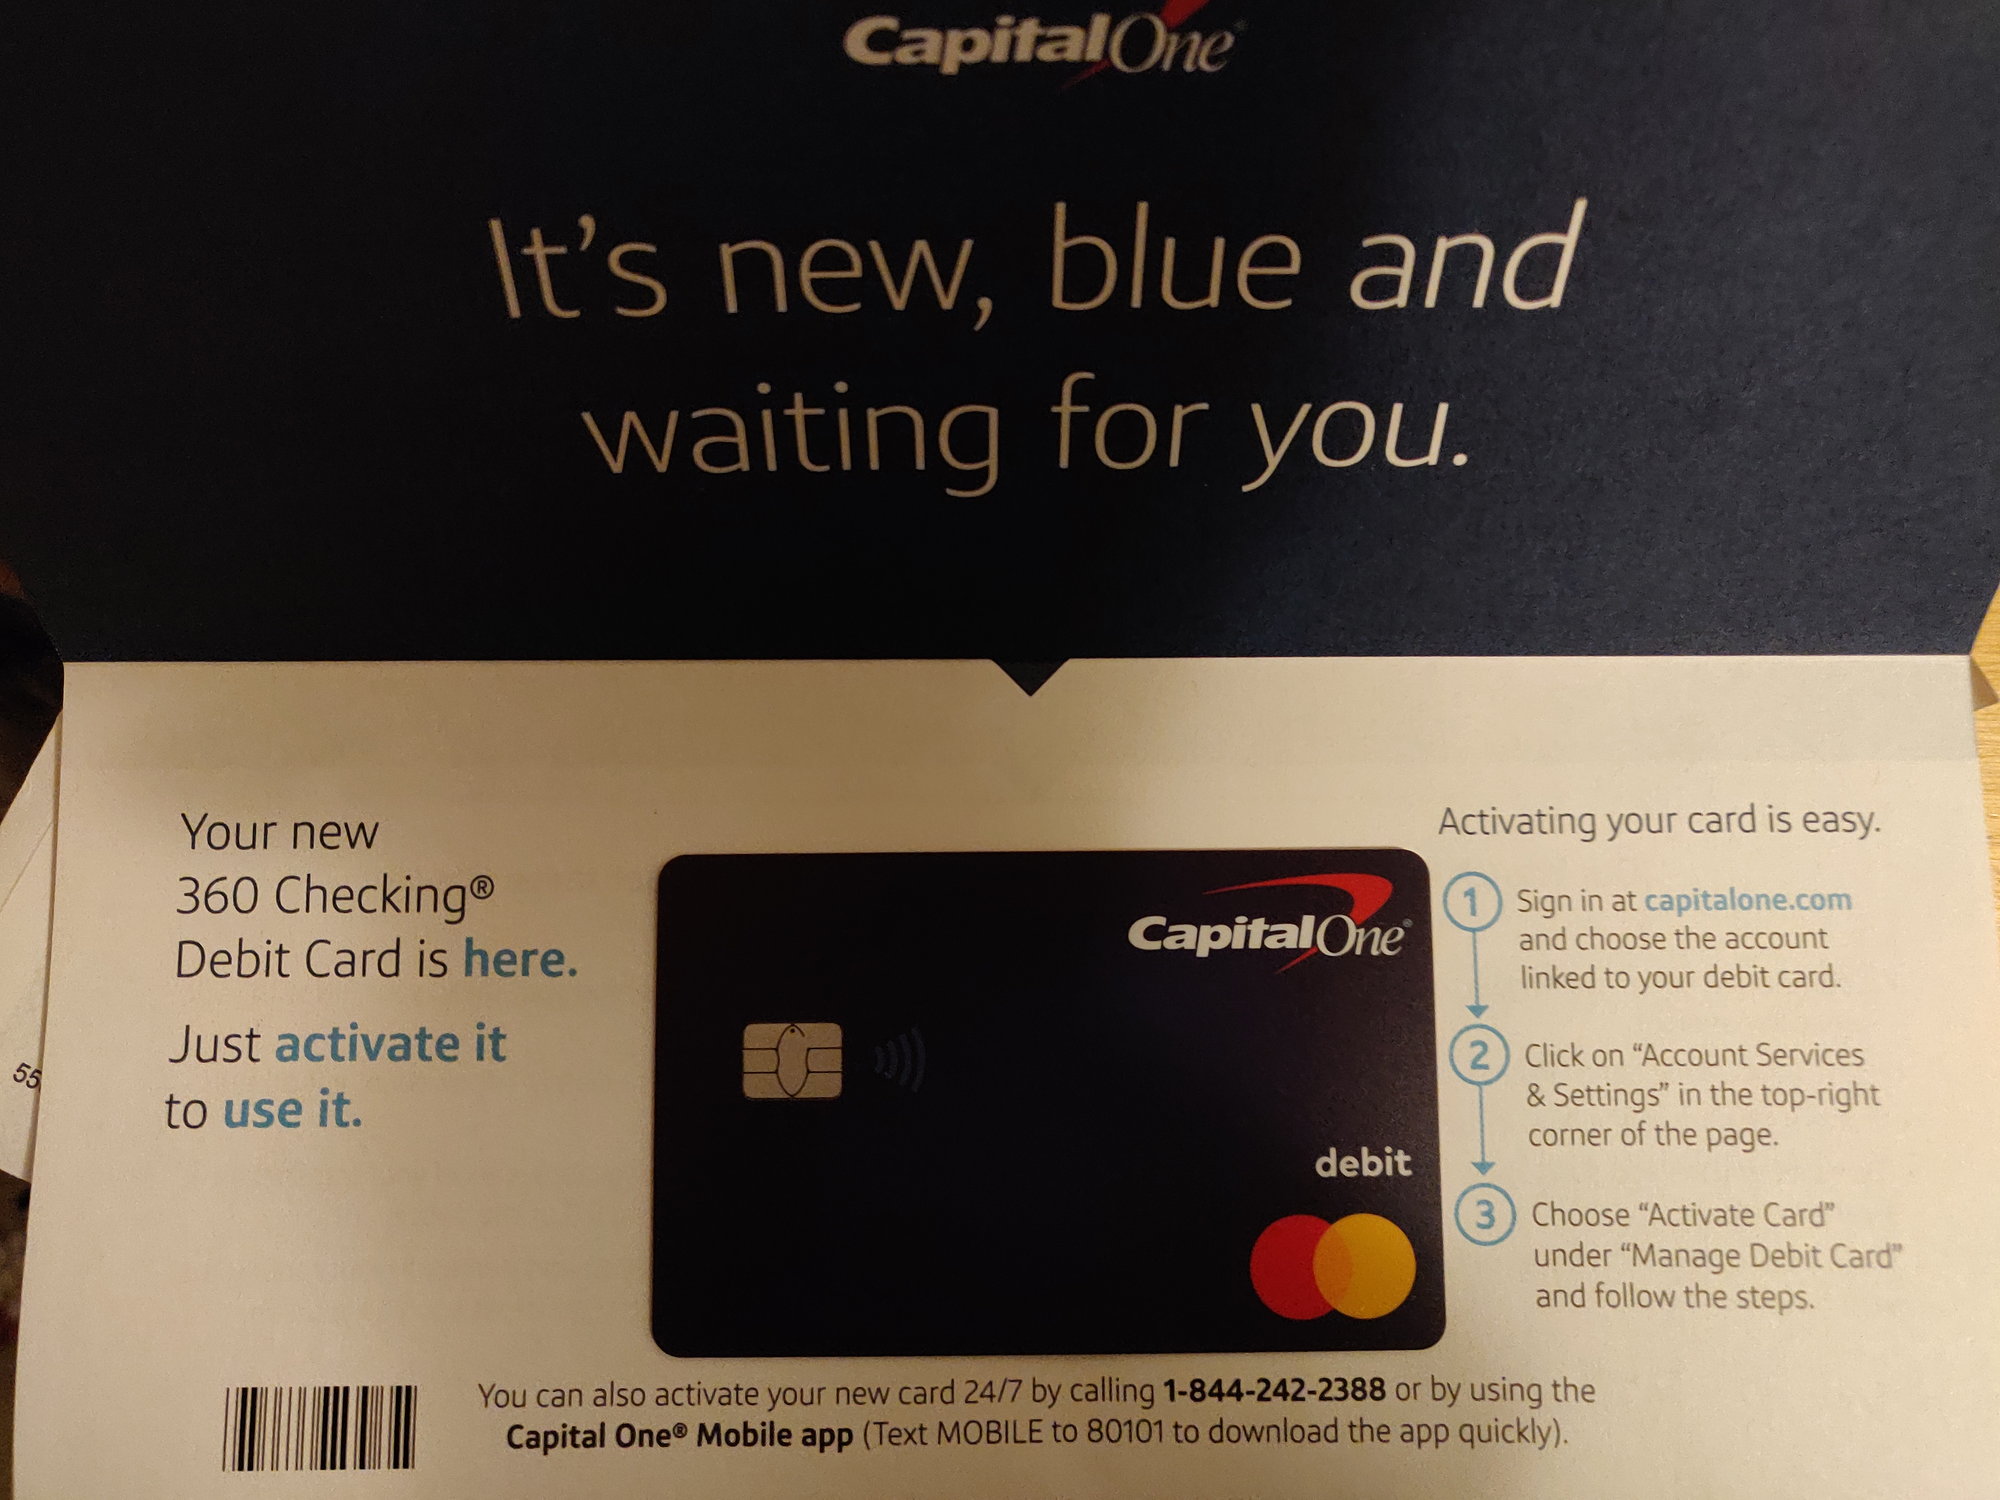 can i buy crypto with capital one debit card